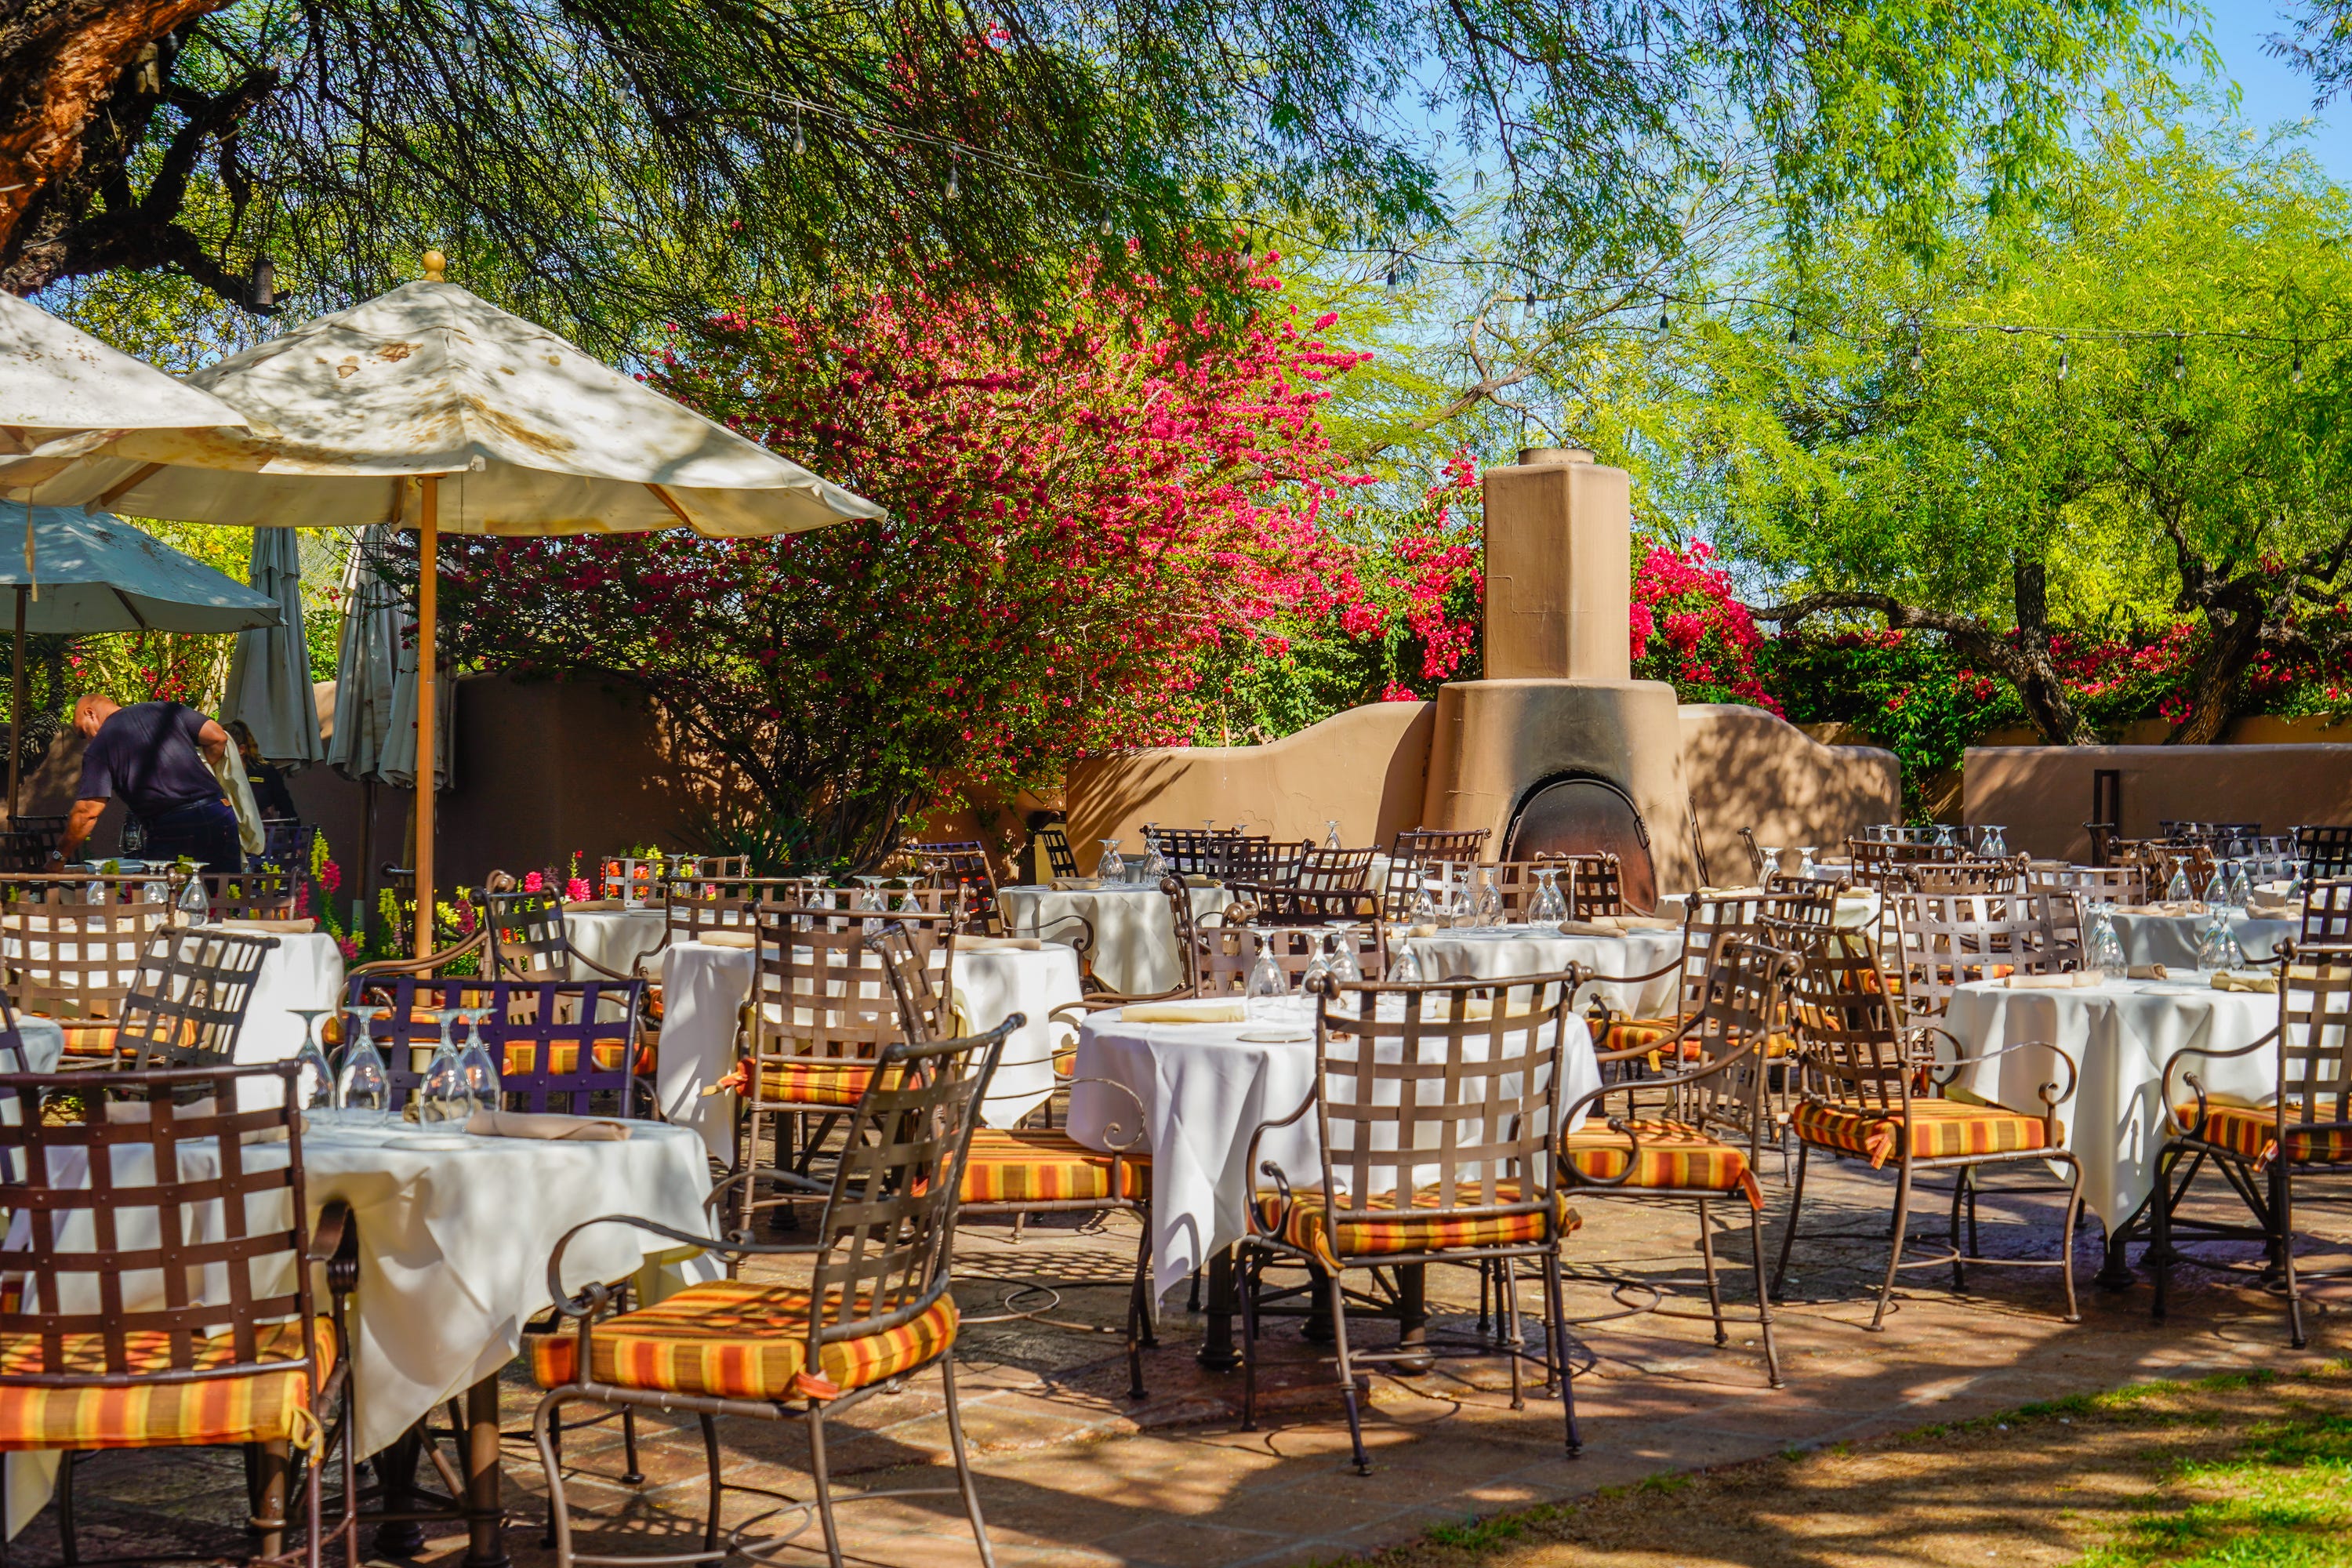 <p>LON's was named the most romantic restaurant in Arizona by <a href="https://www.foodandwine.com/travel/restaurants/most-romantic-restaurant-in-every-state">Food & Wine Magazine</a> in 2022. It serves breakfast, brunch, lunch, and dinner and has a massive, garden-side outdoor patio as well as indoor seating. LON's Last Drop is the bar next to it, which has an outdoor adobe fireplace.</p>